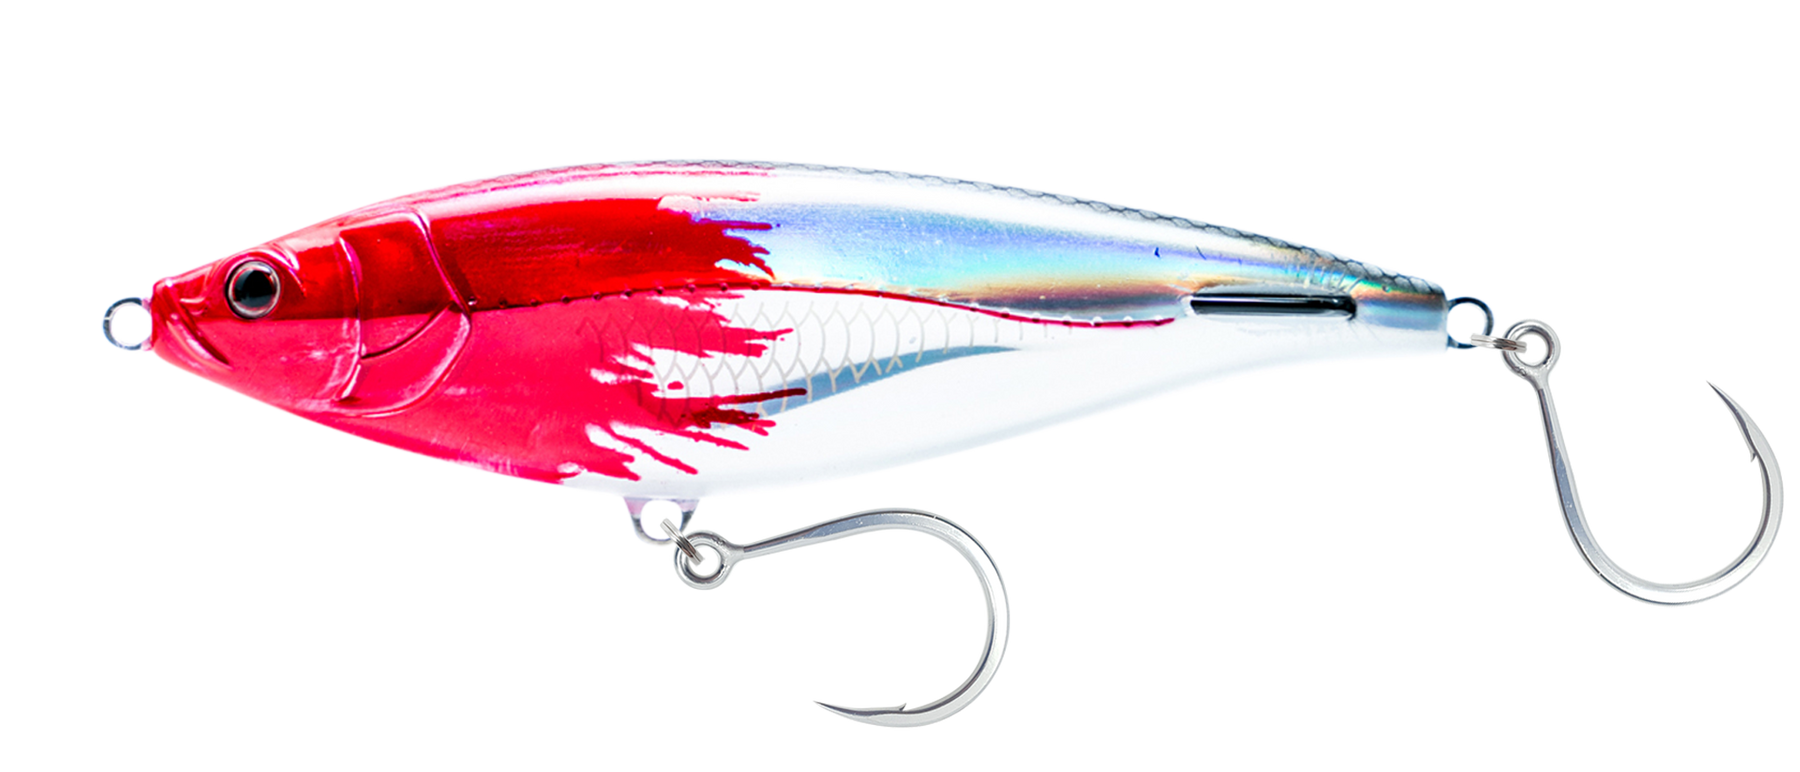 Madscad 150 SNK 6 – Nomad Tackle